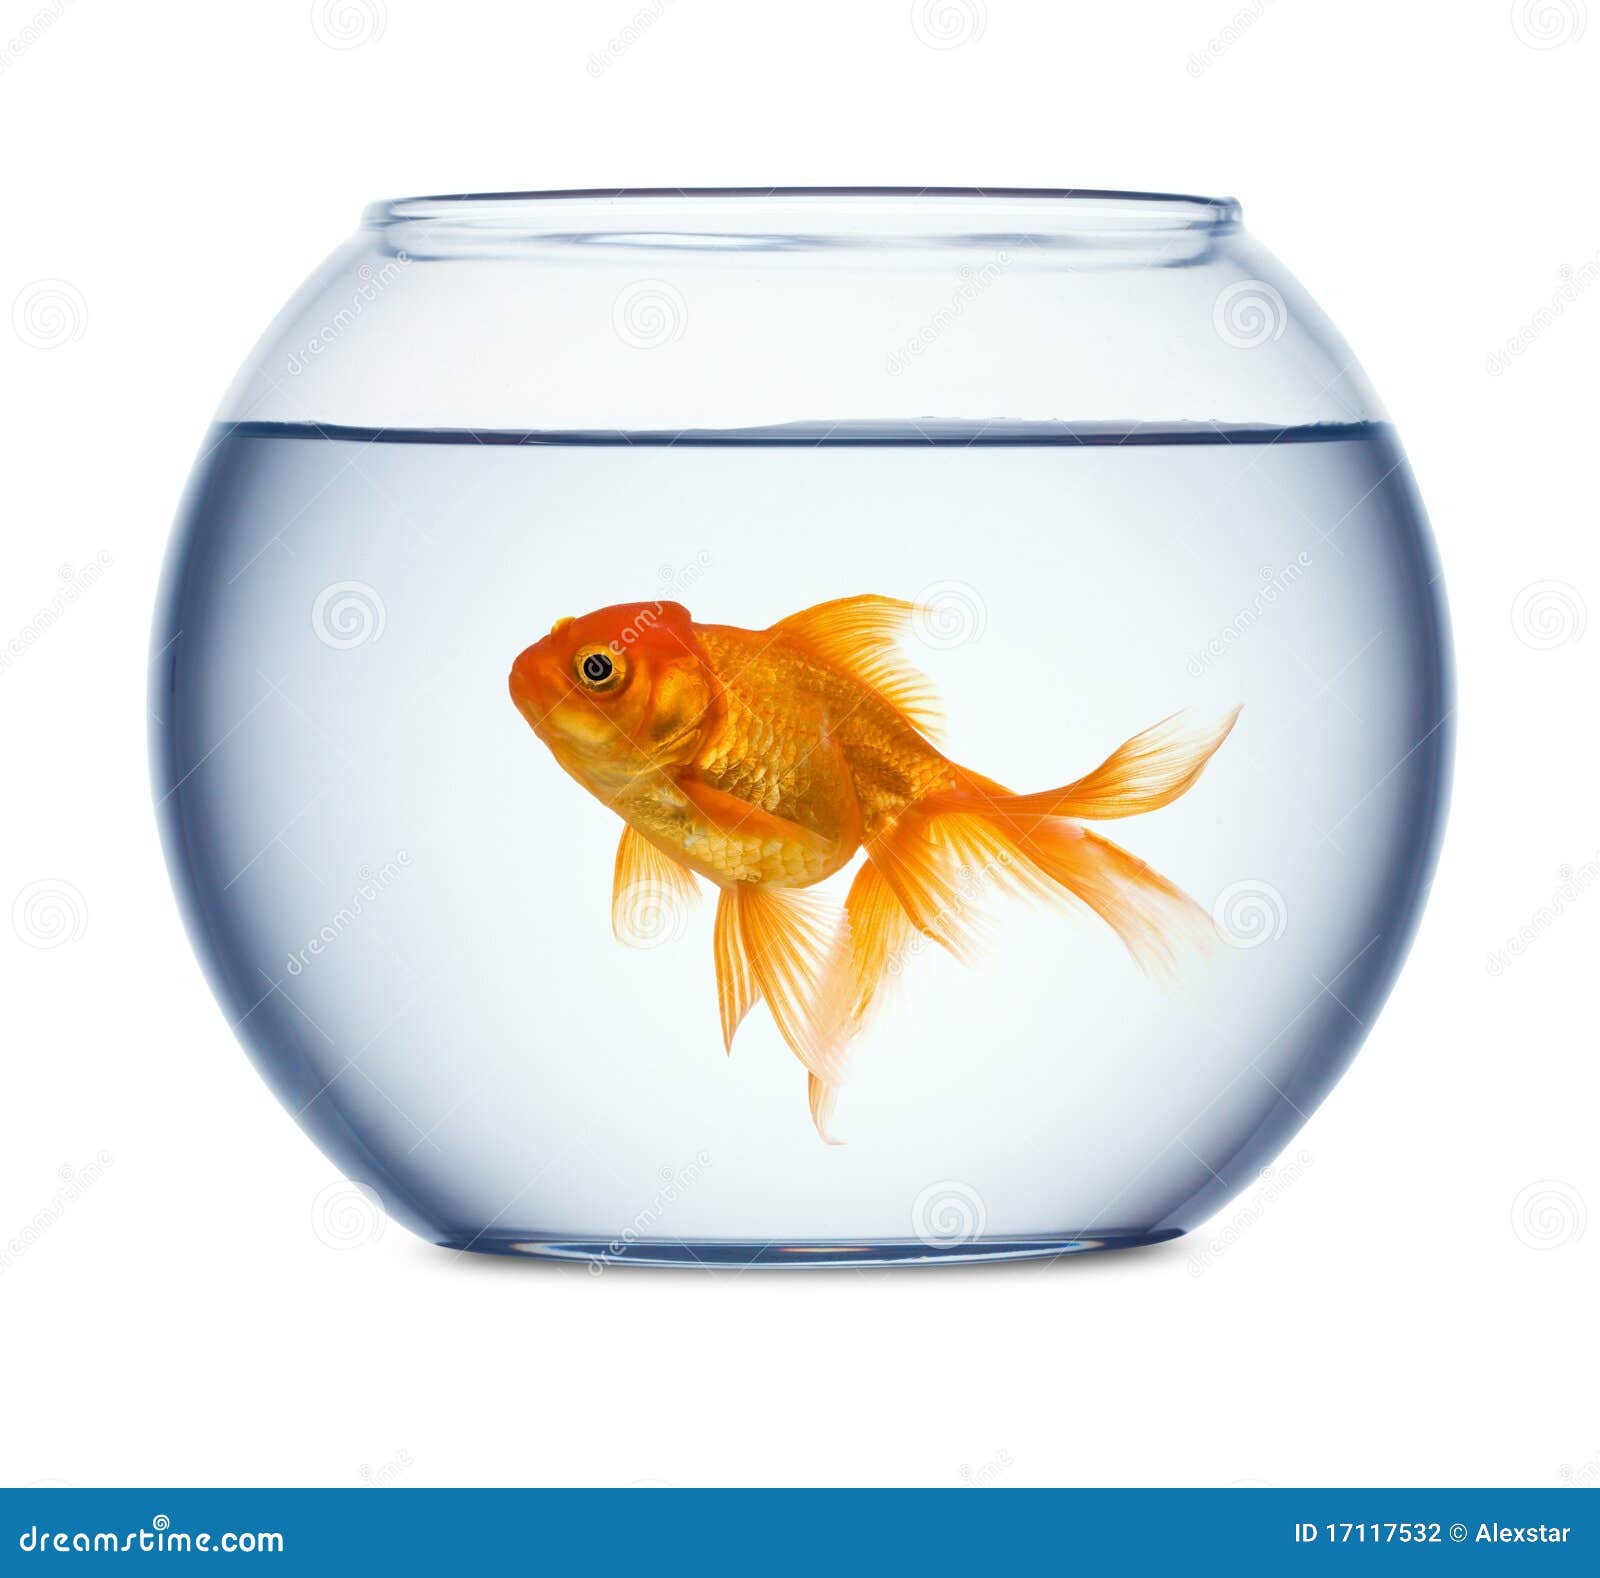 goldfish in a fishbowl